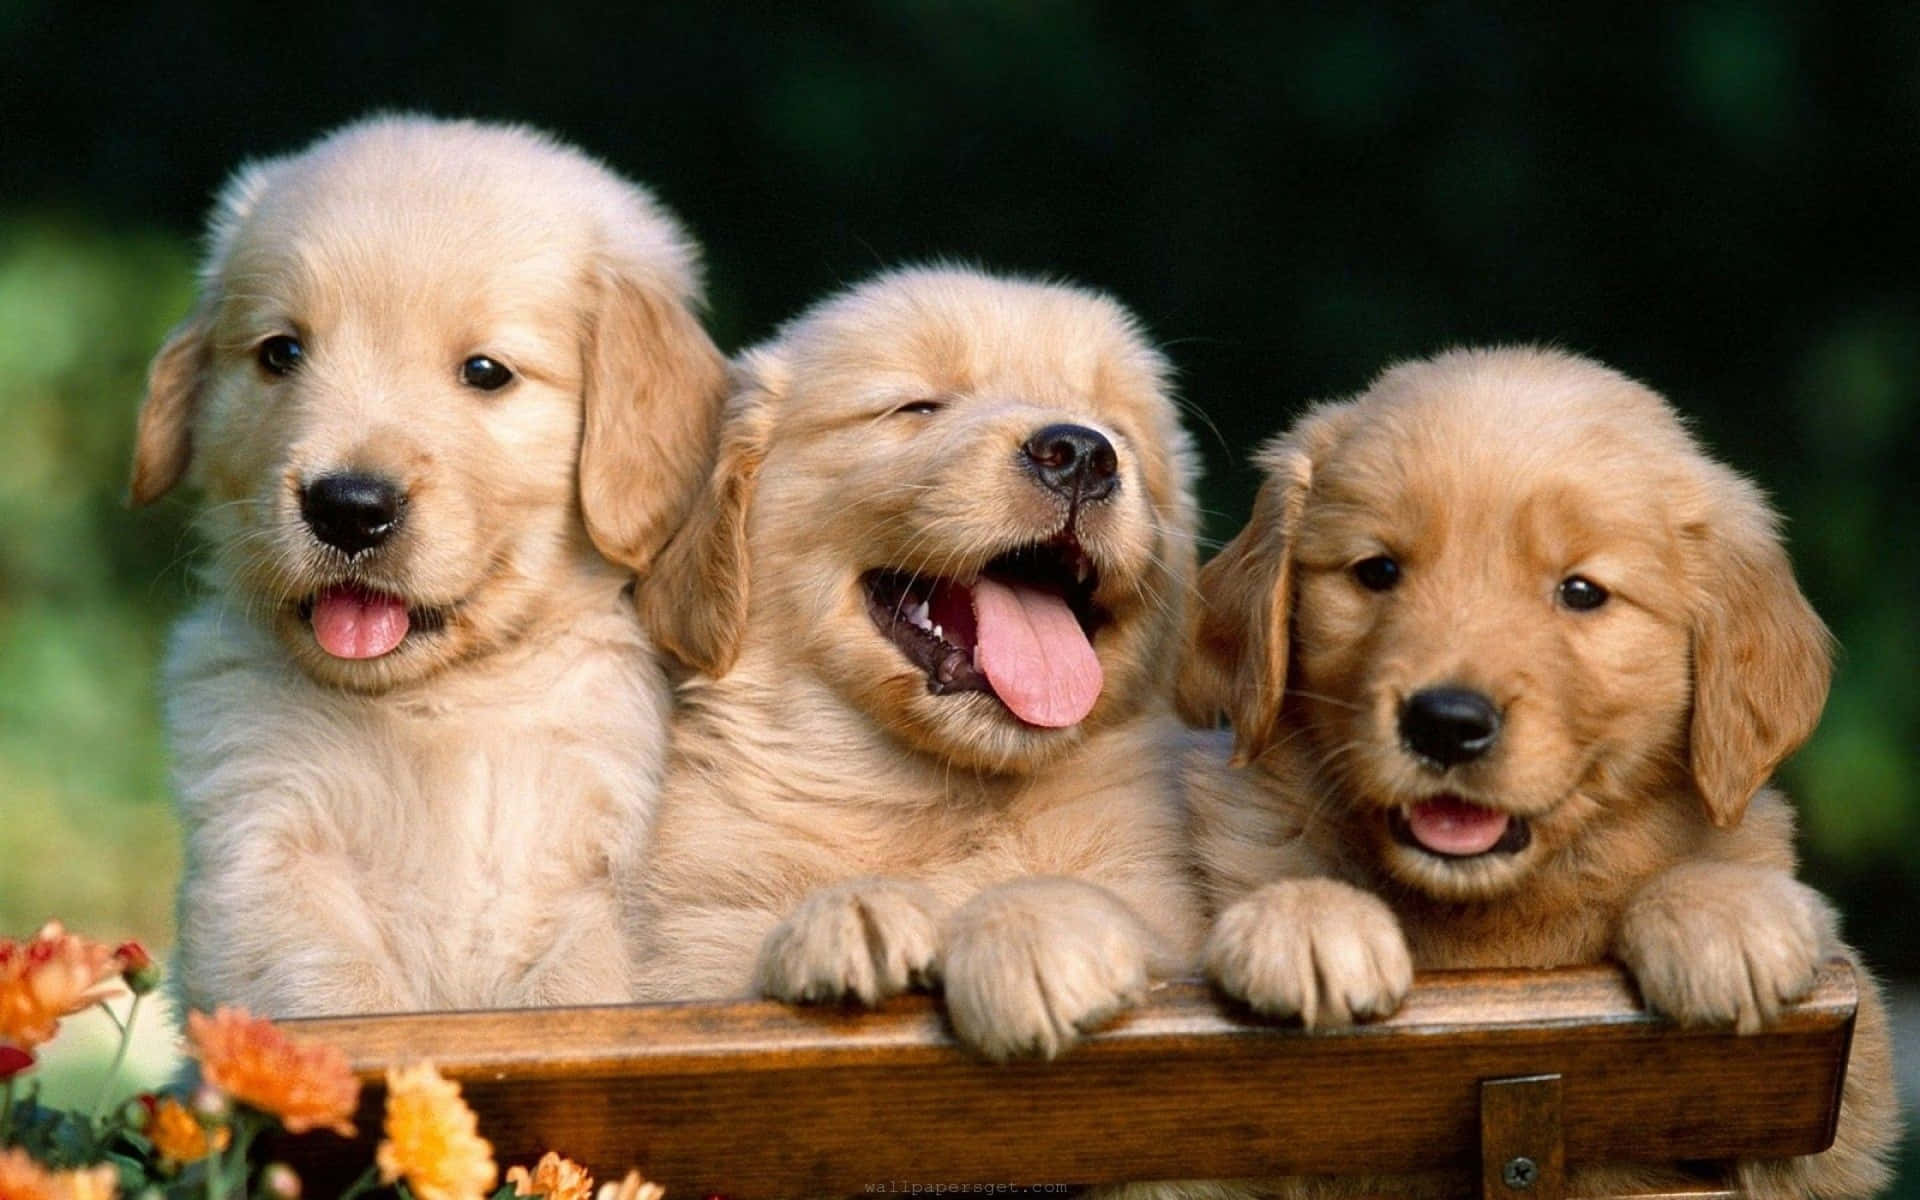 Adorable Puppies Lounging Together